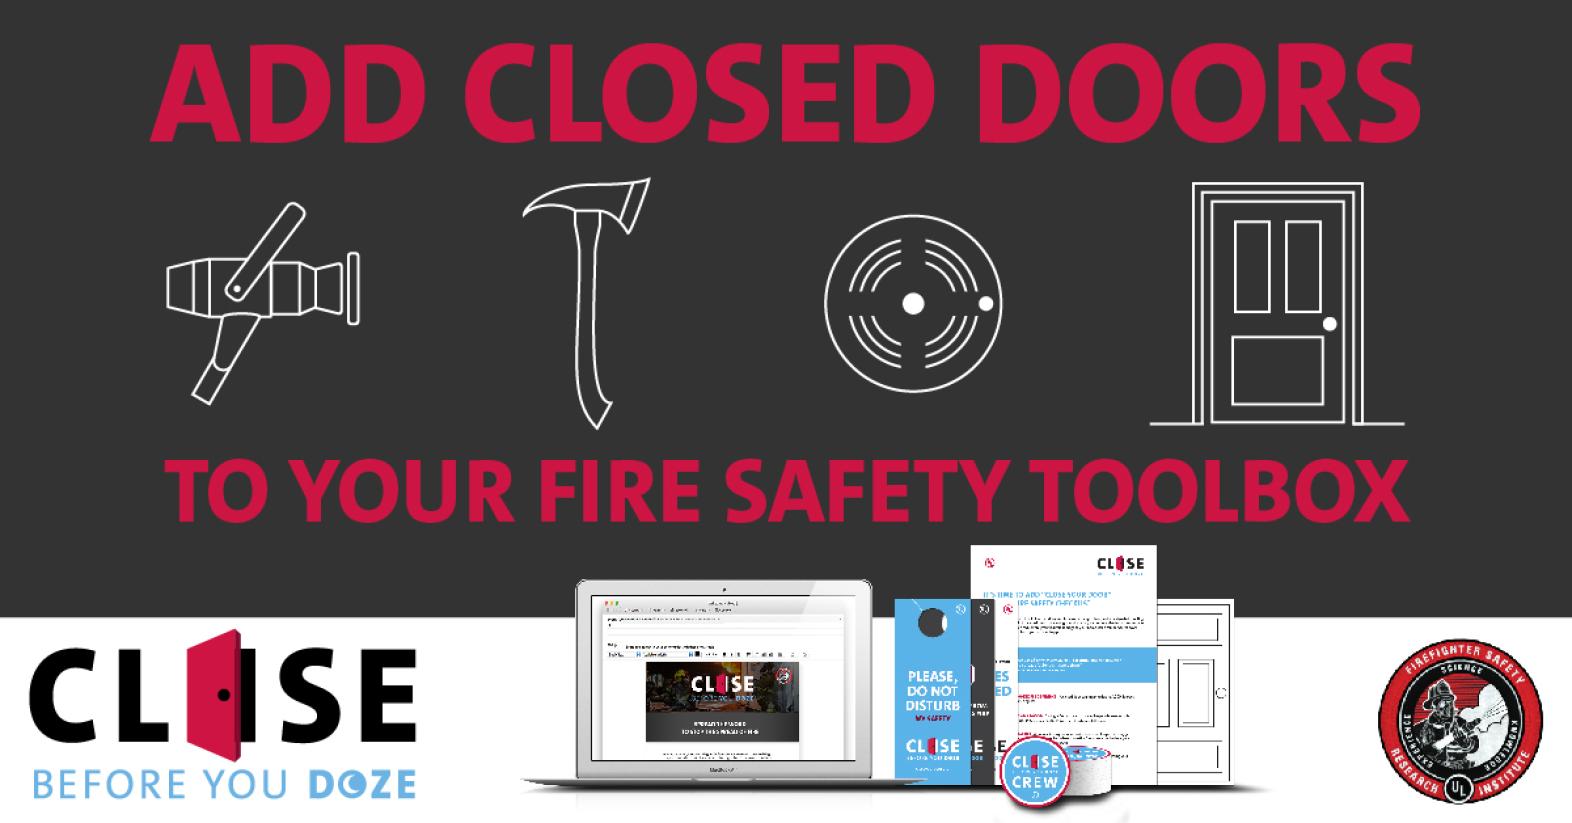 Add closed doors to your fire safety toolbox.